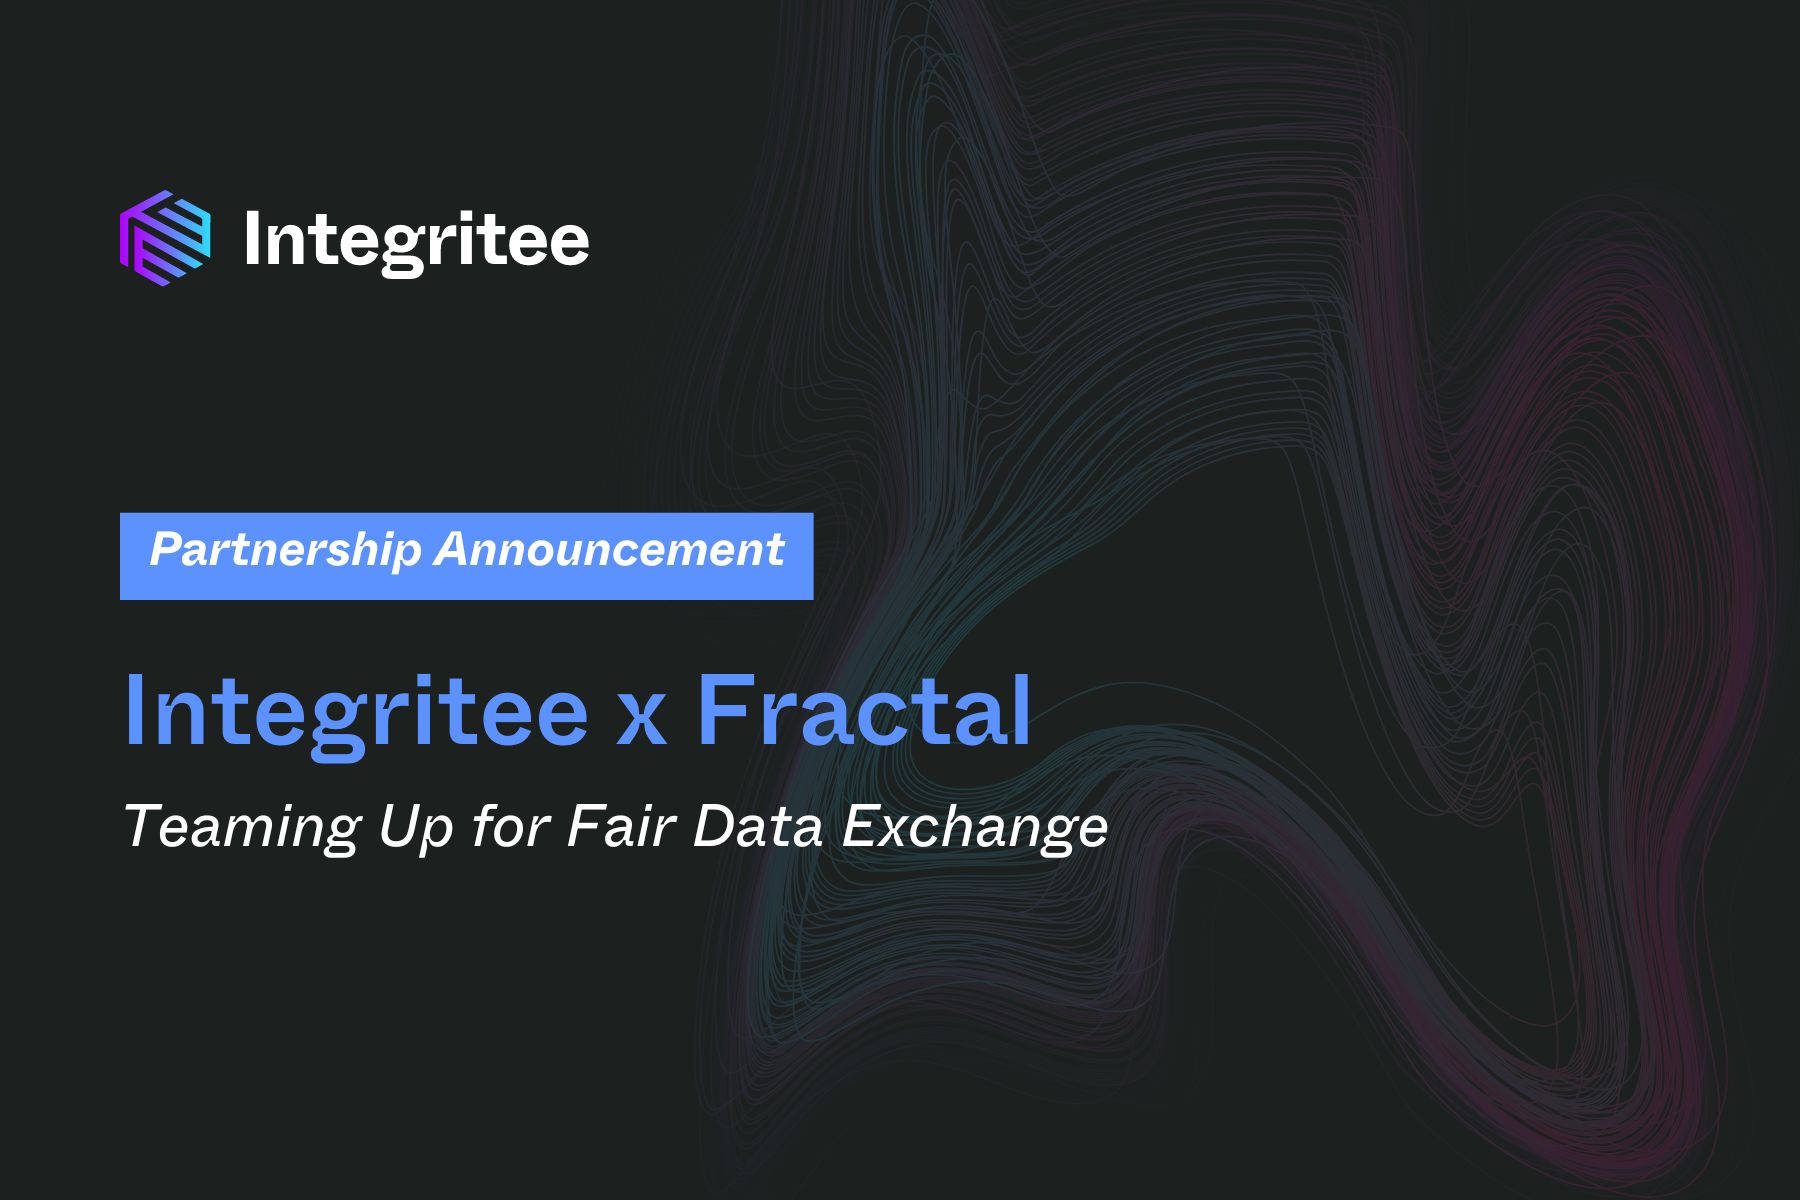 Integritee and Fractal Team Up for Fair Data Exchange